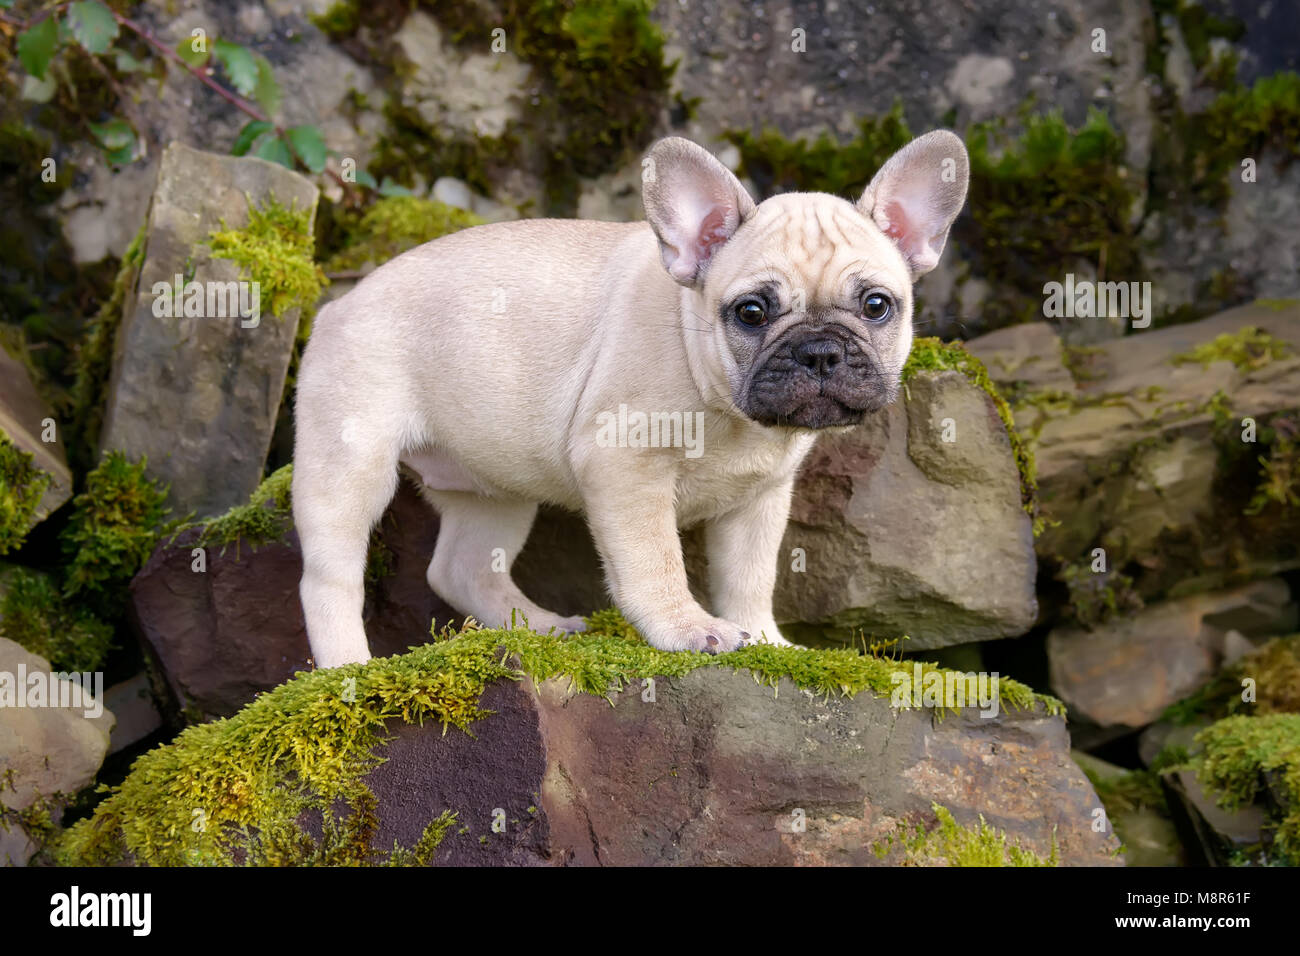 Cute eight weeks old French Bulldog puppy, a faithfully and puppy-eyed fawn colored female dog standing on a heap of moss-covered stones Stock Photo